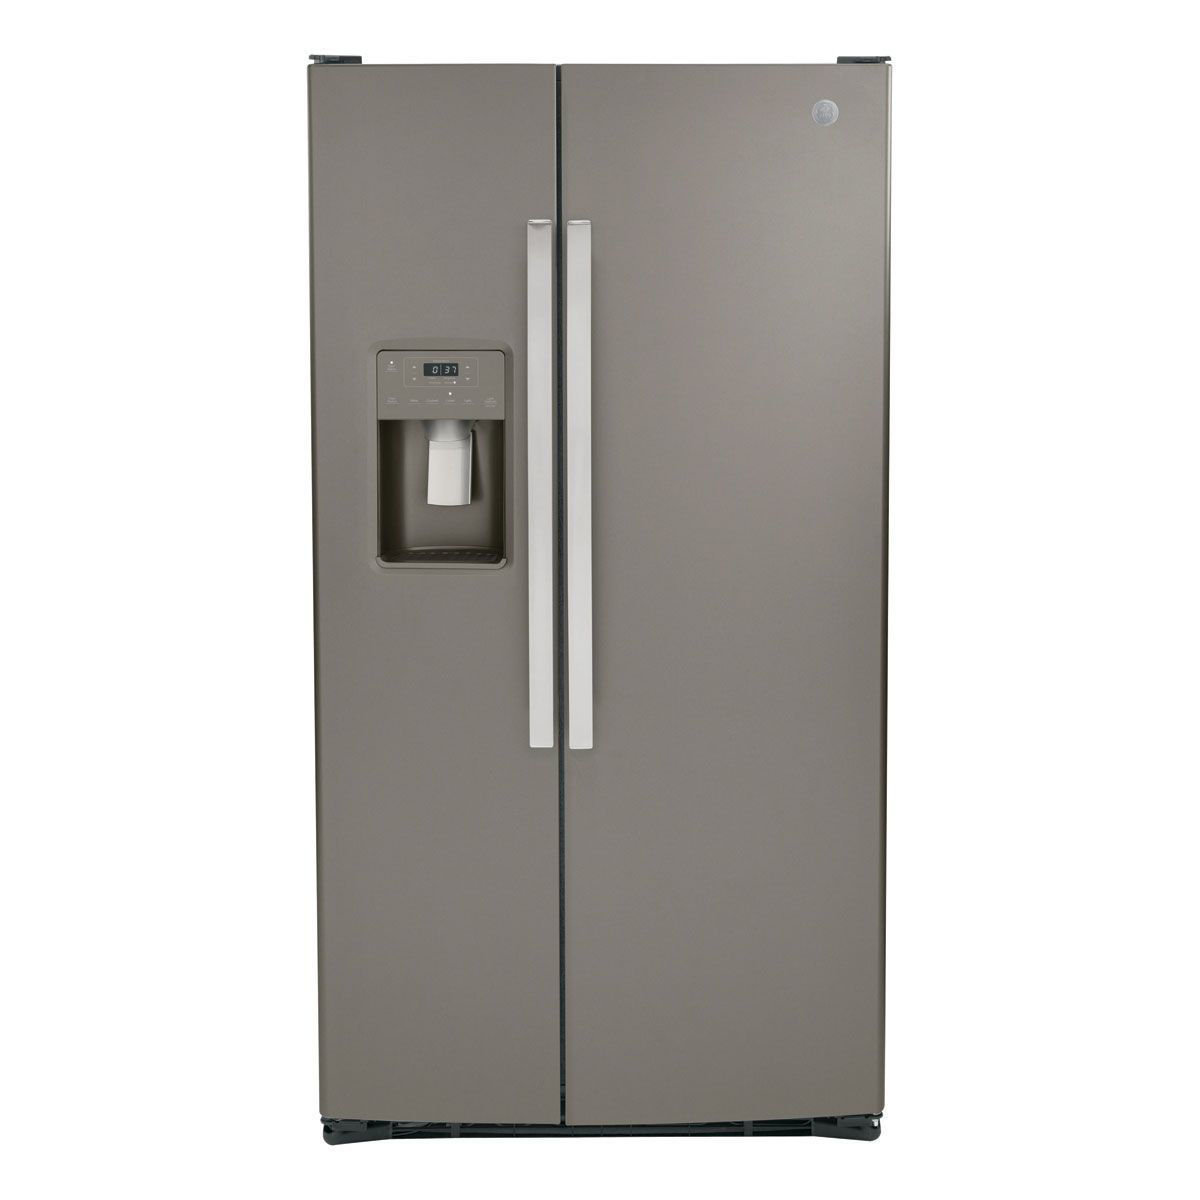 Picture of G.E. SIDE BY SIDE REFRIGERATOR